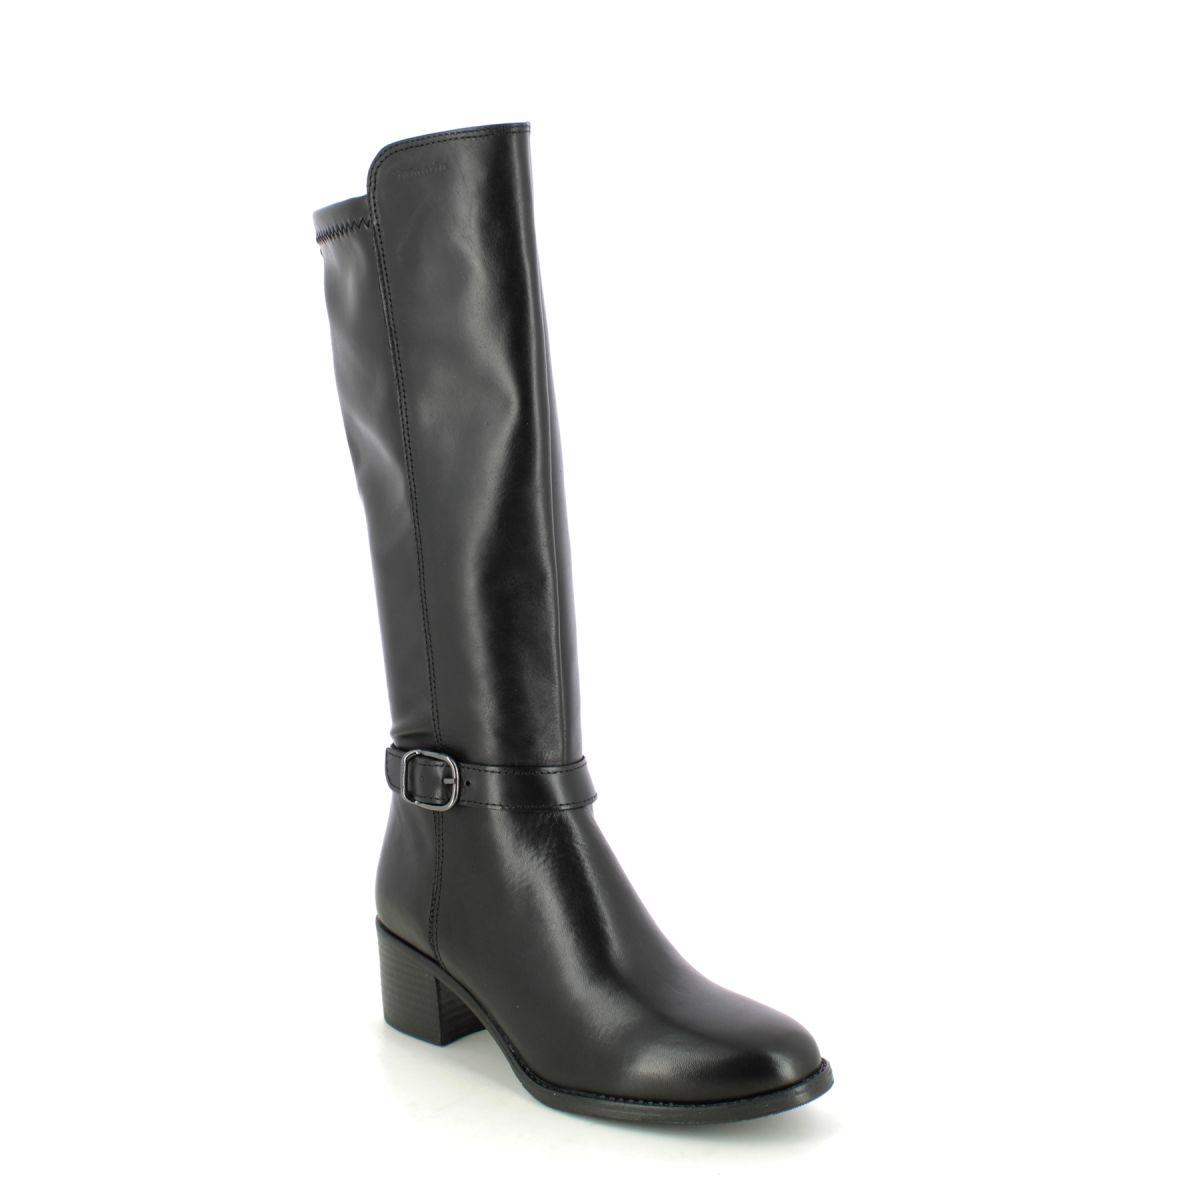 Tamaris Paulettalong Black Leather Womens Knee-High Boots 25530-27-001 In Size 36 In Plain Black Leather